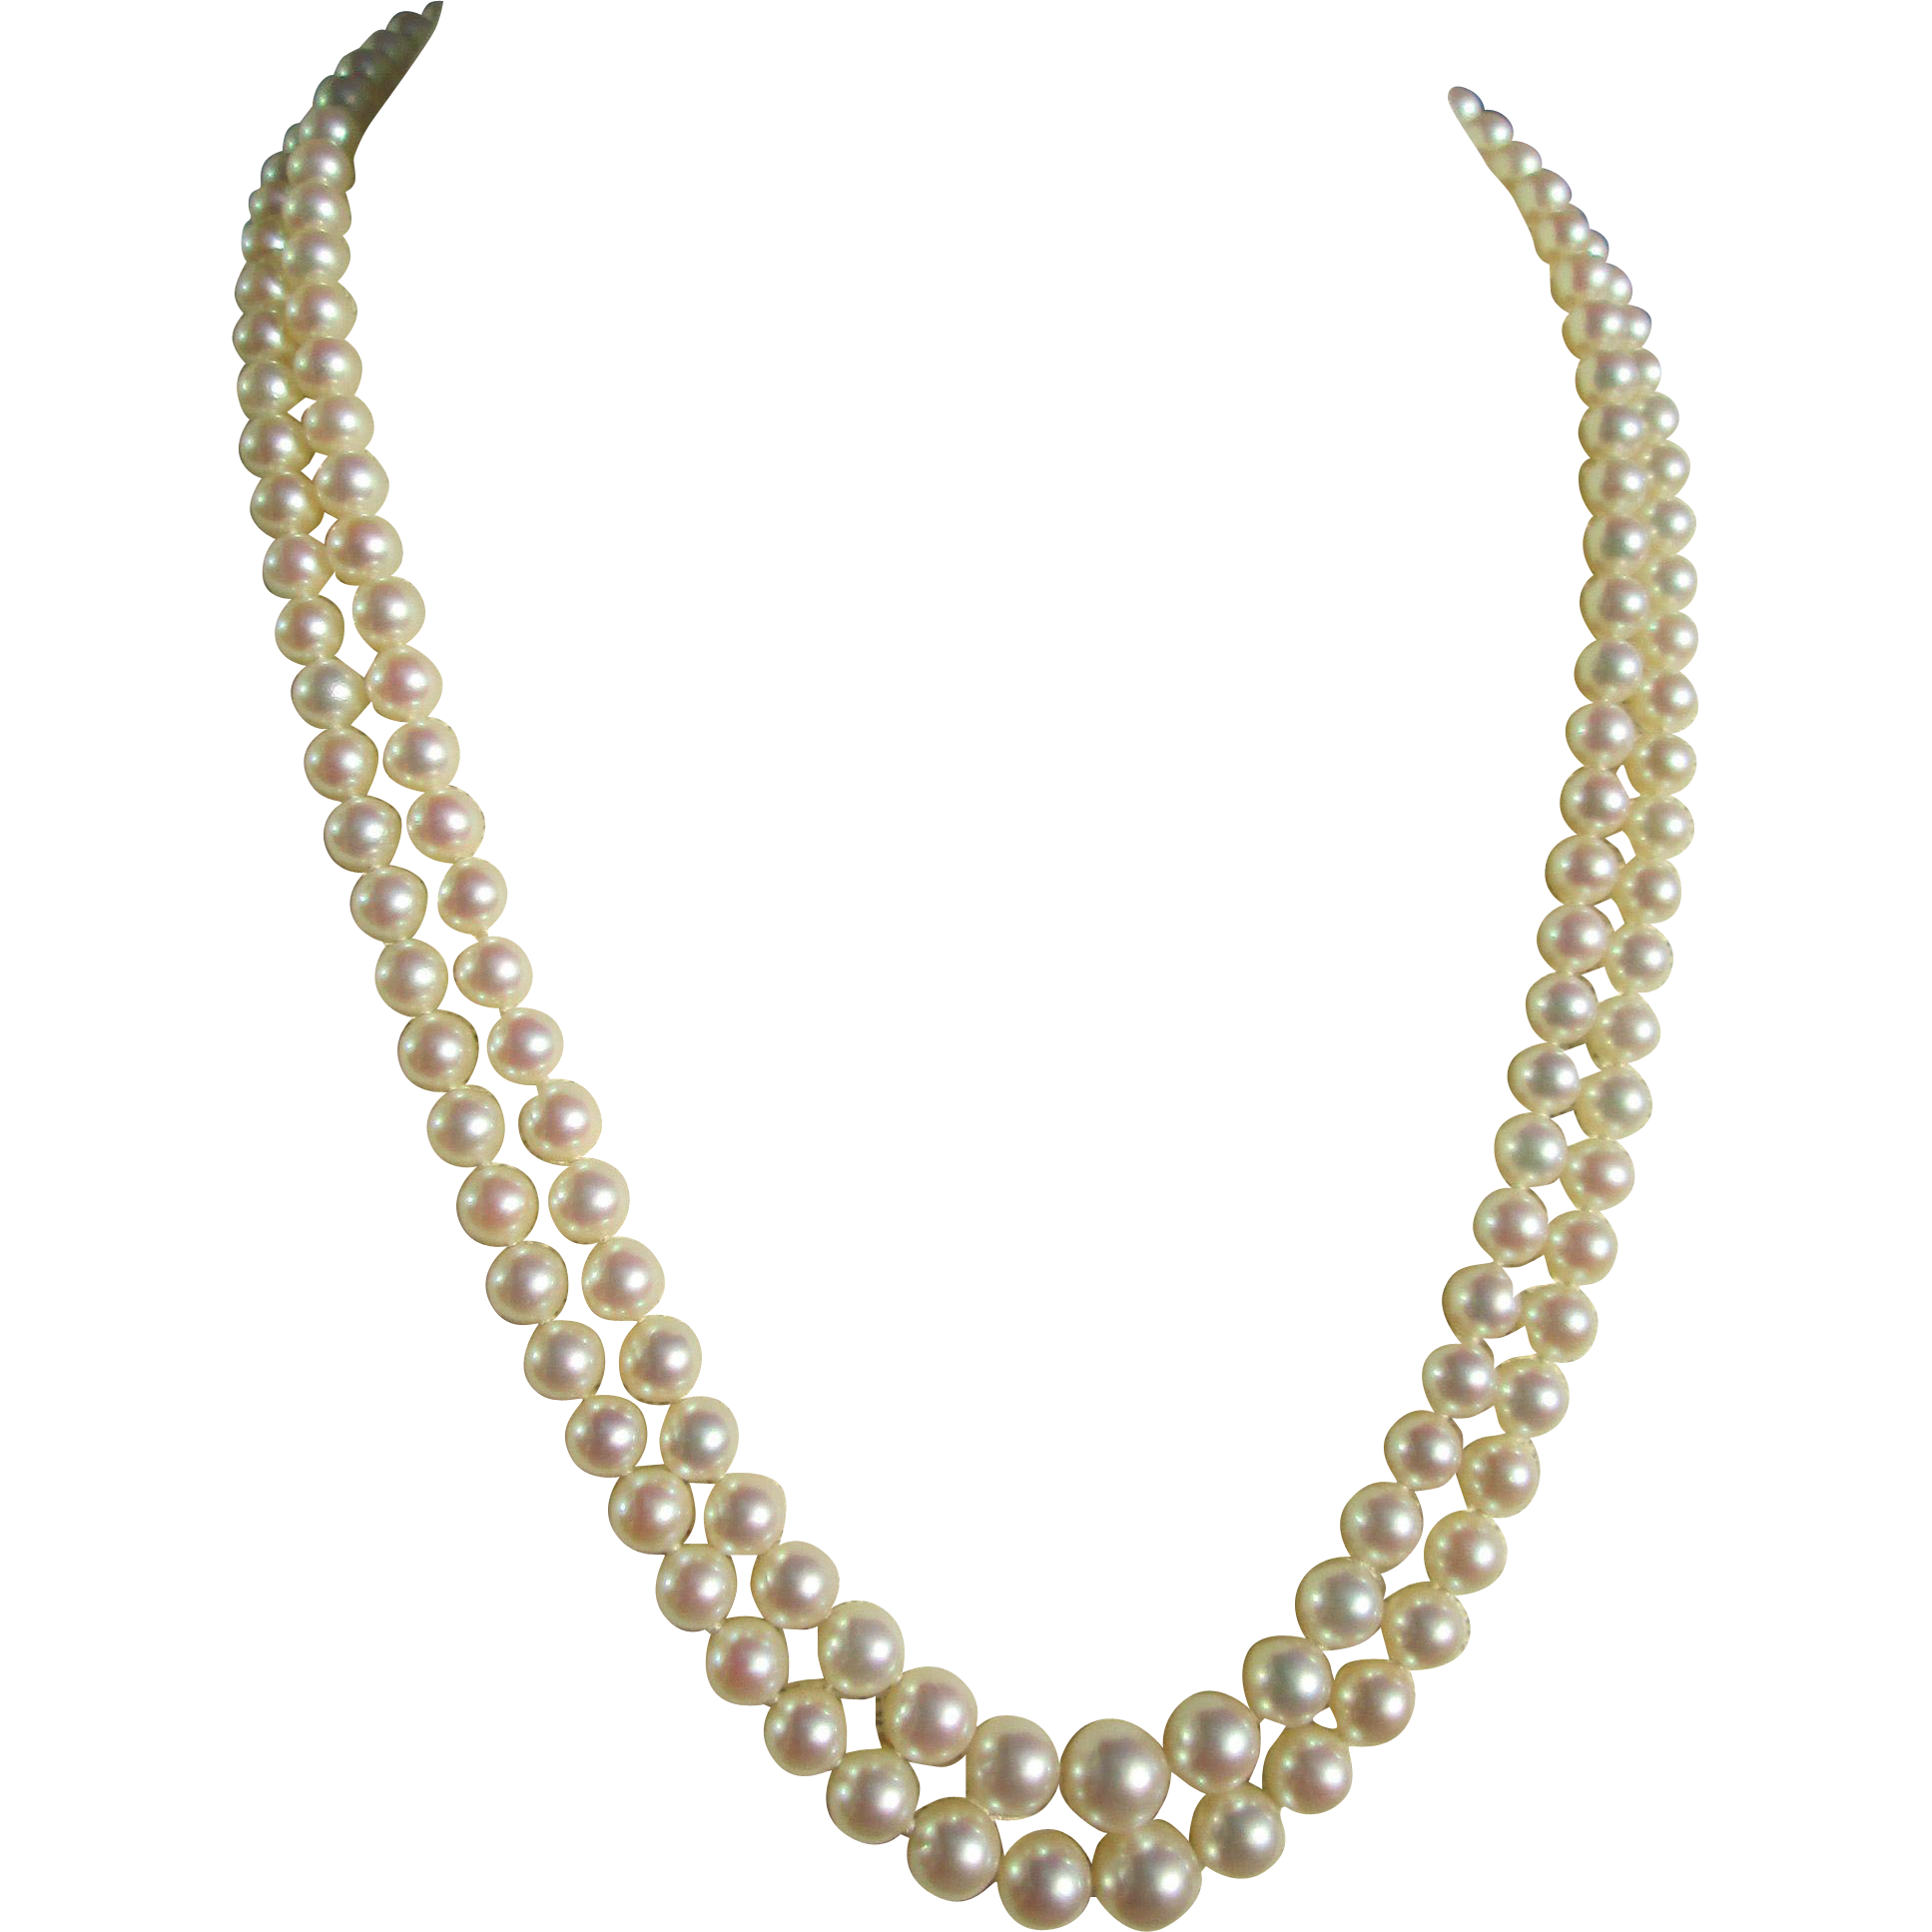 Pearl necklace png.